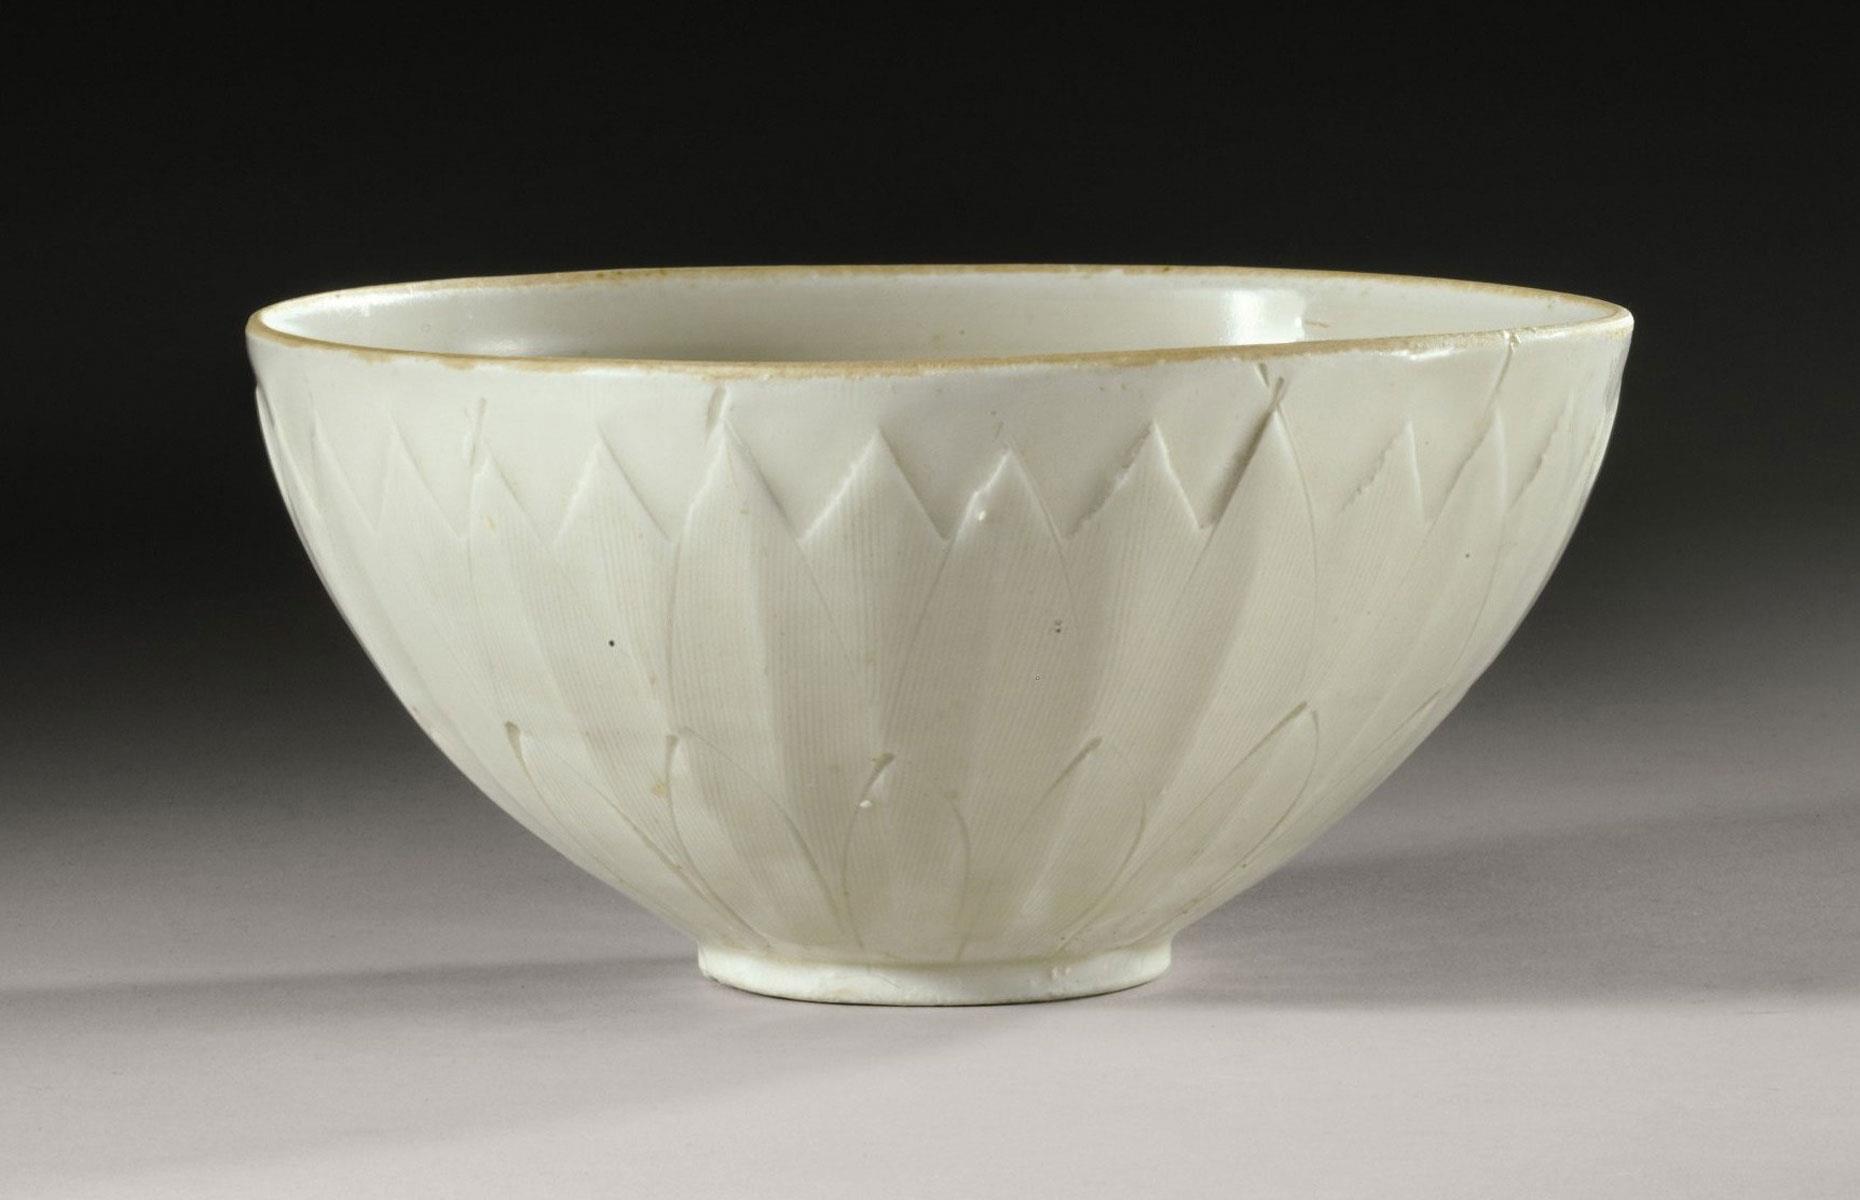 The 1,000-year-old Chinese bowl sold for $2.2 million (£1.7m)